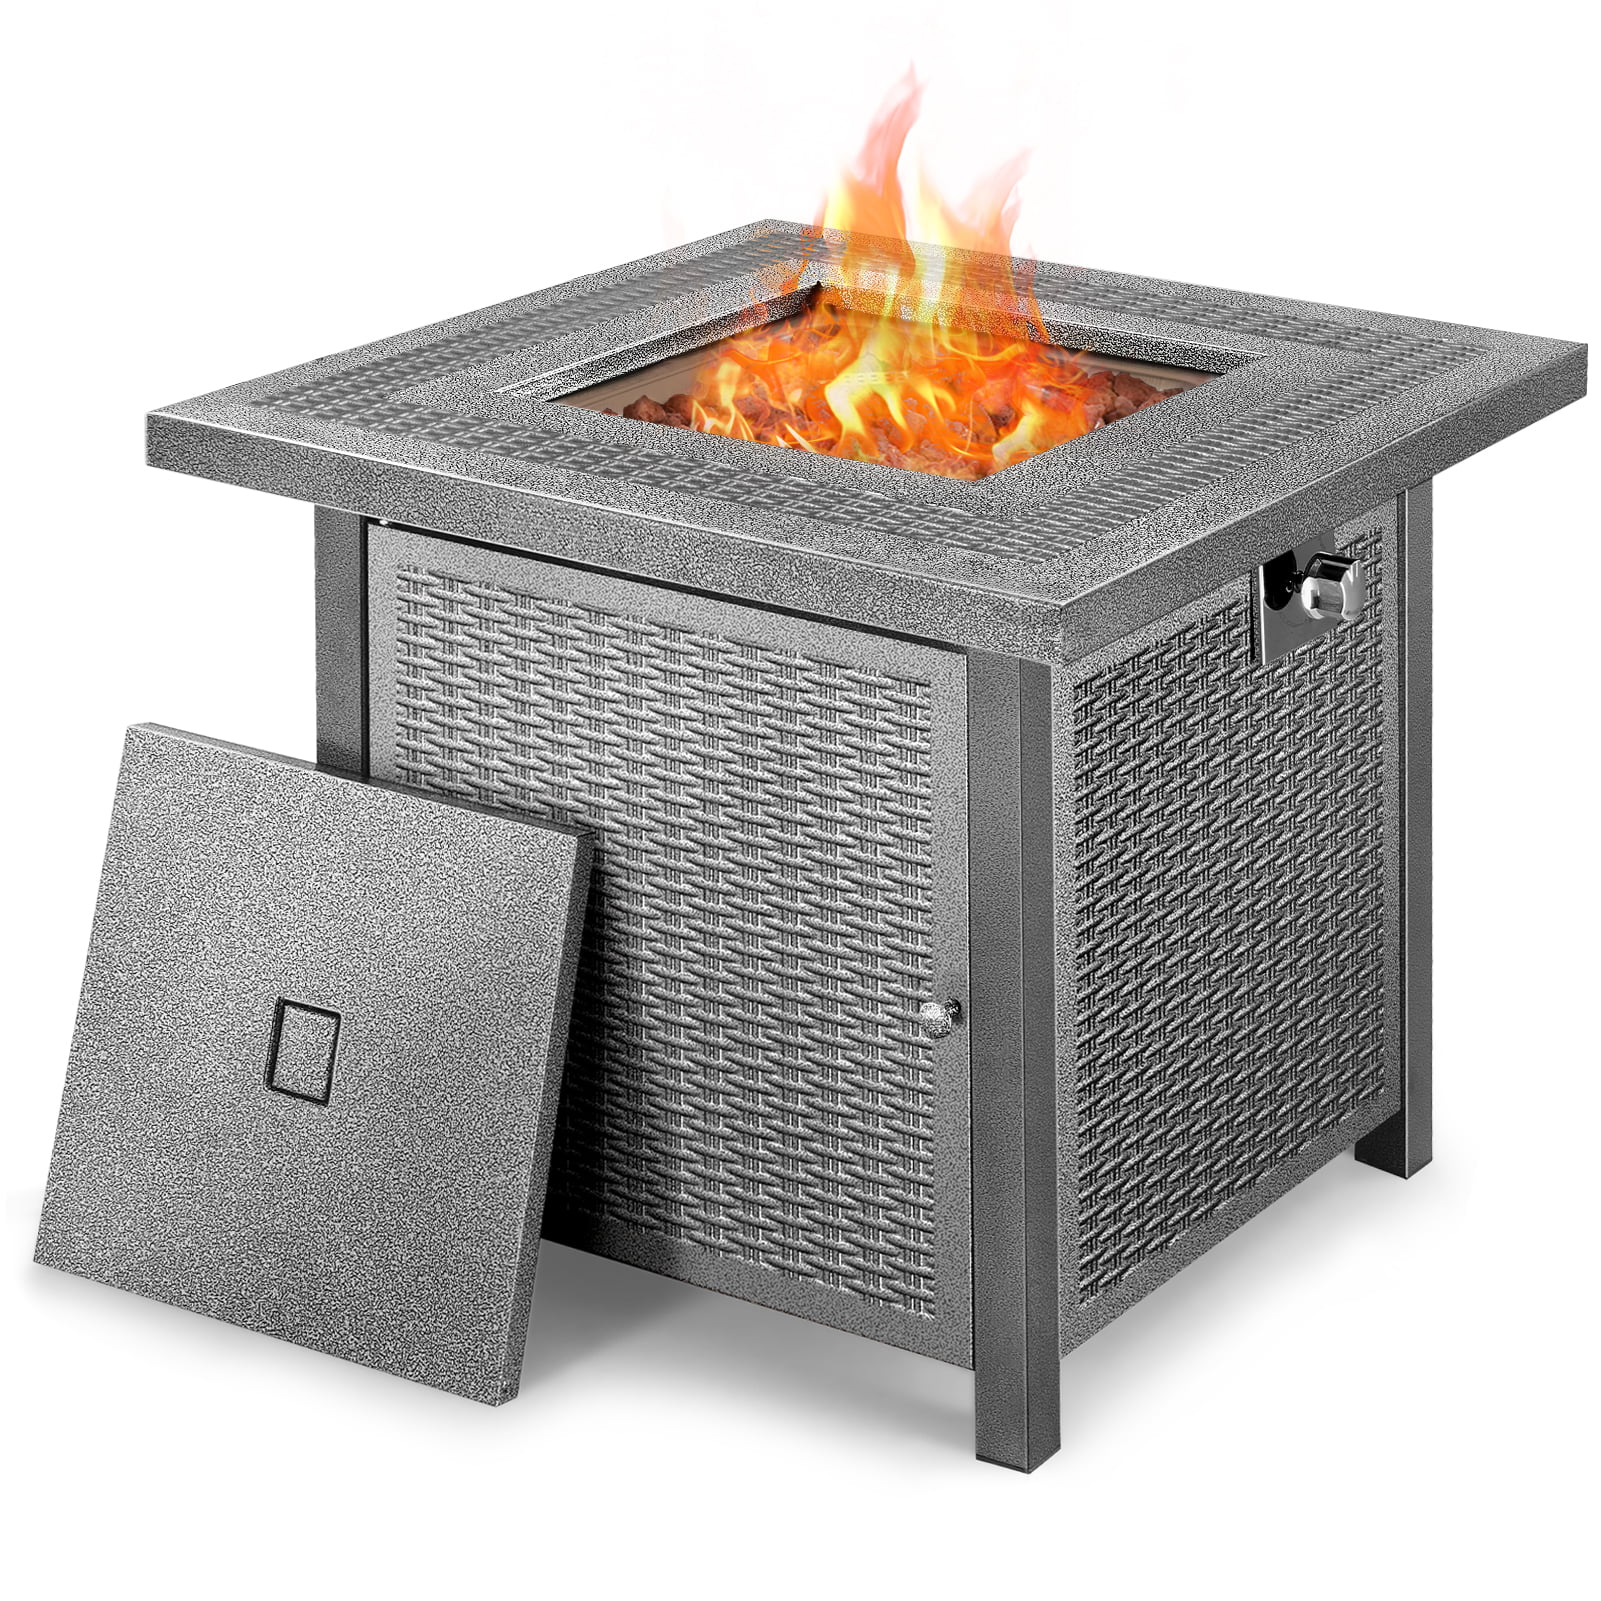 Qomotop Outdoor Propane Fire Pit Gas, How Many Btu For Propane Fire Pit